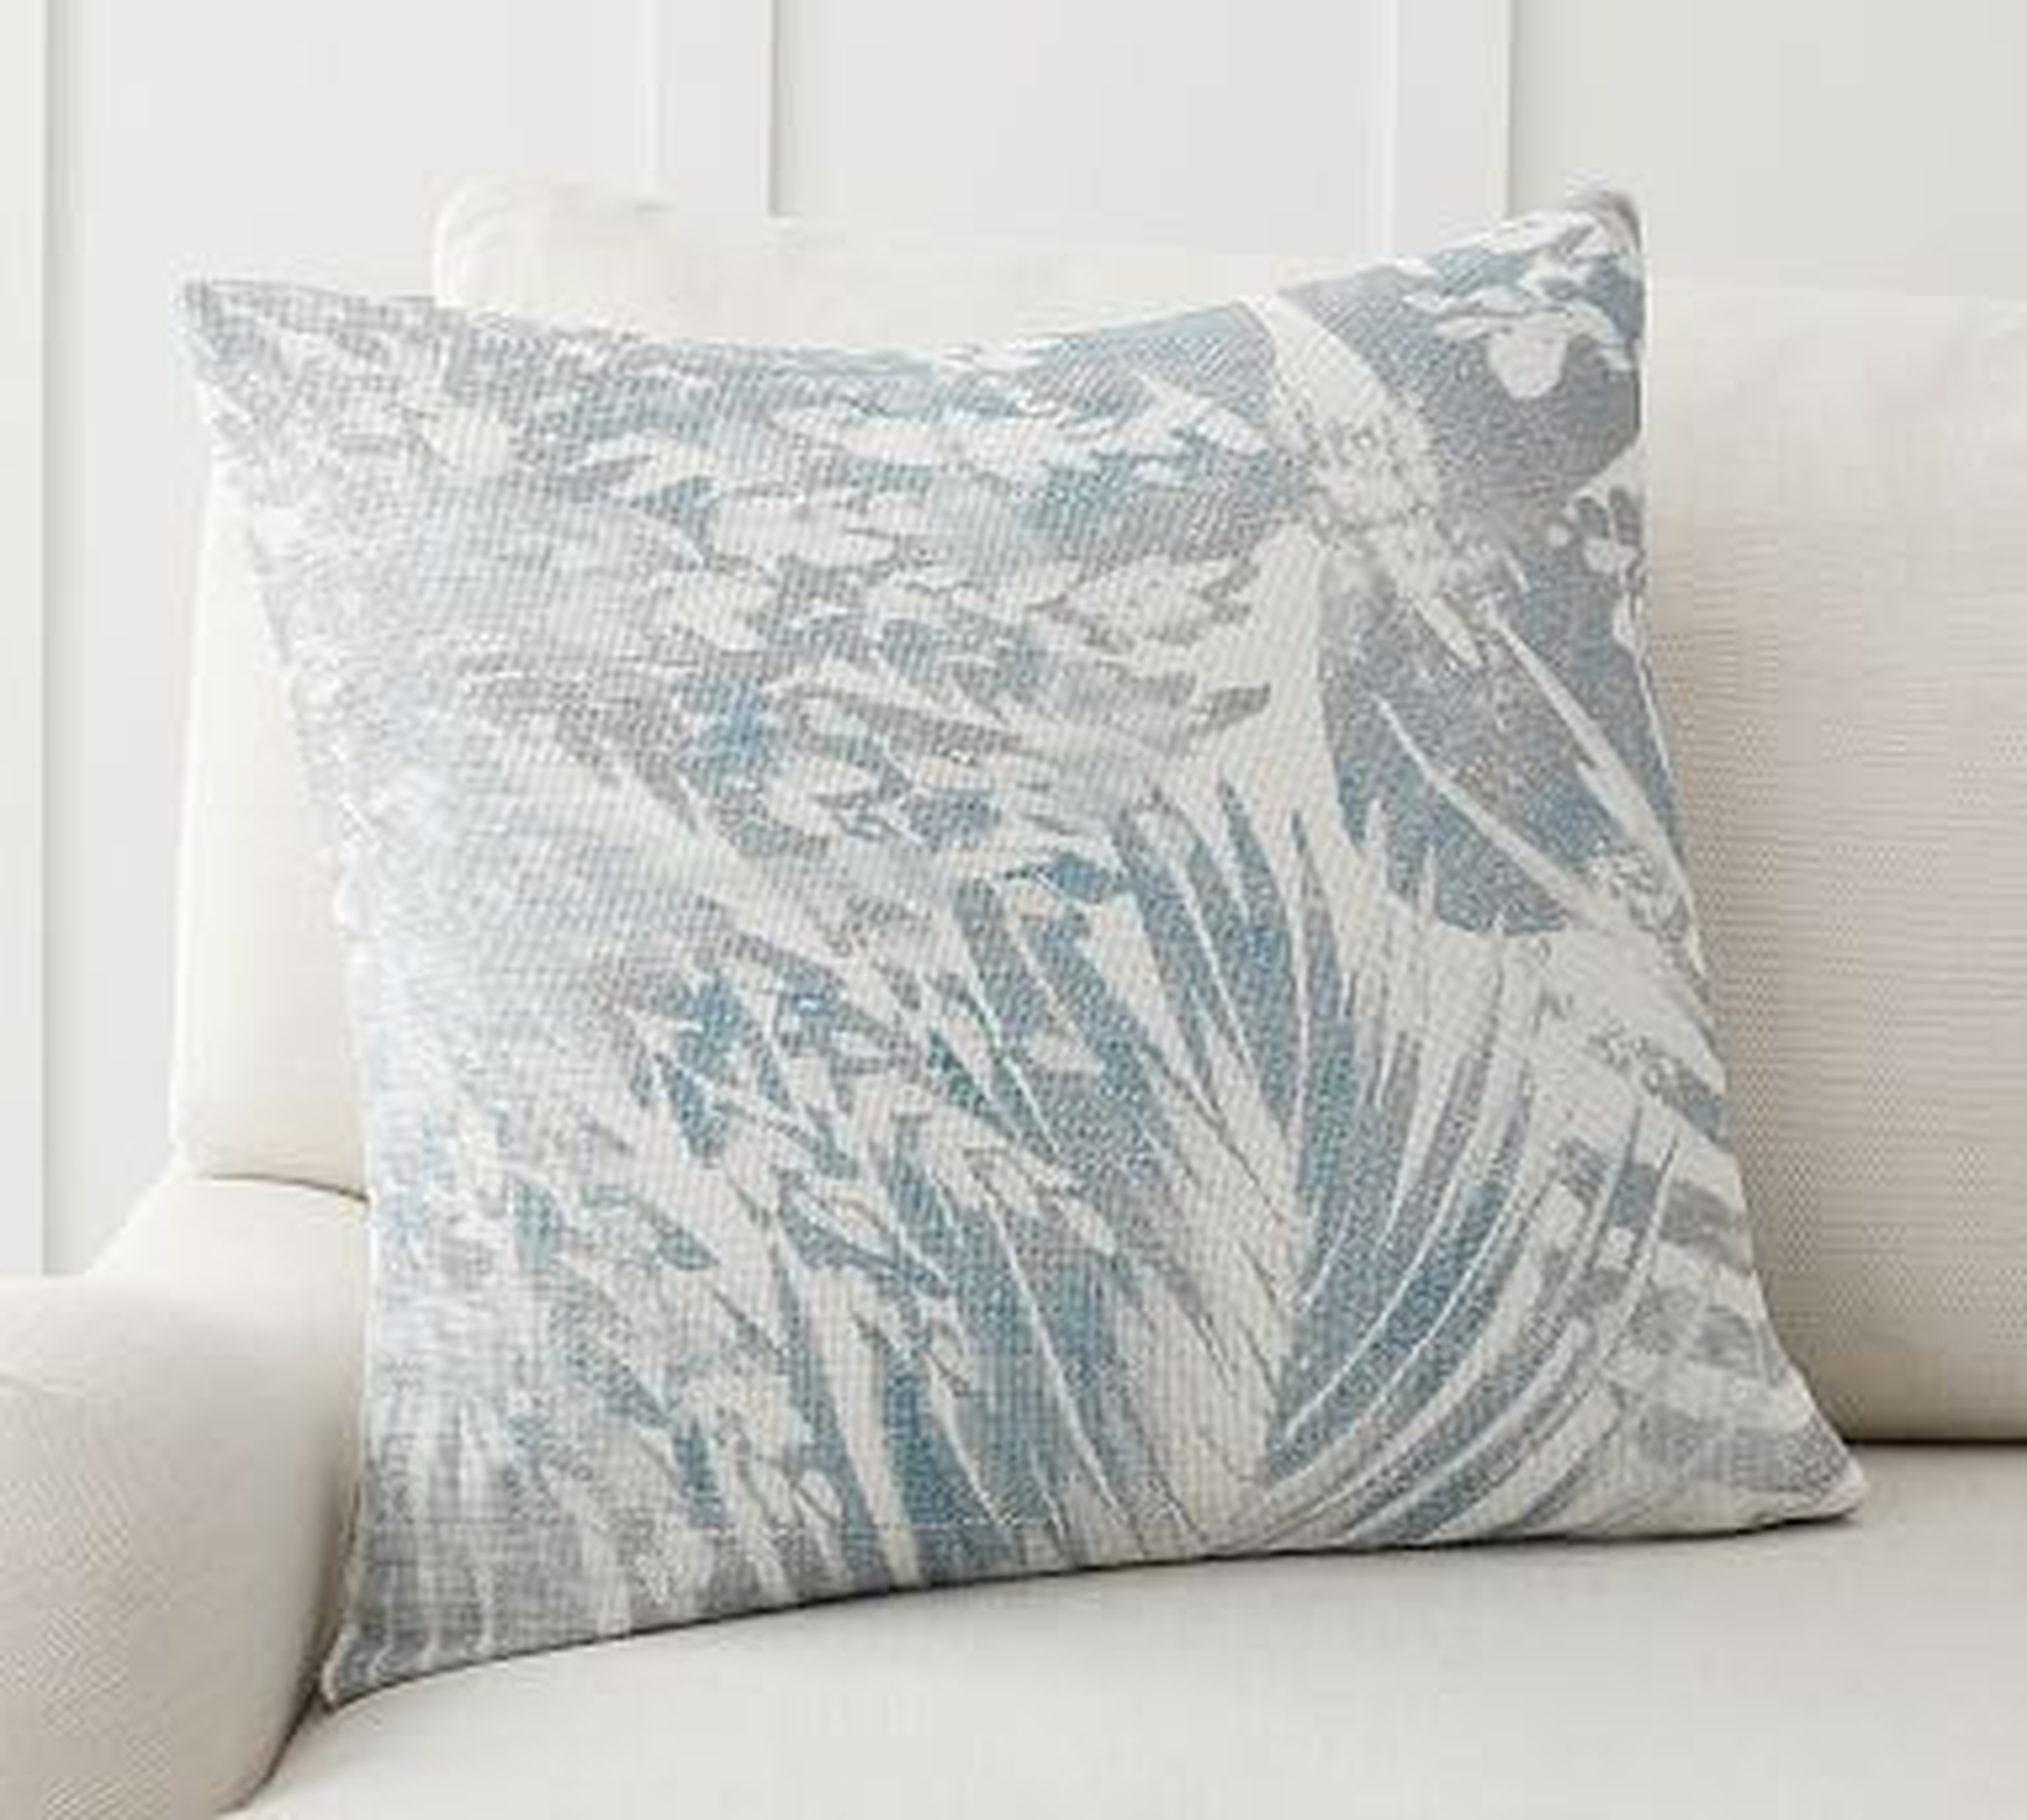 Cool Palm Printed Pillow Cover, 20 x 20", Blue Multi - Pottery Barn